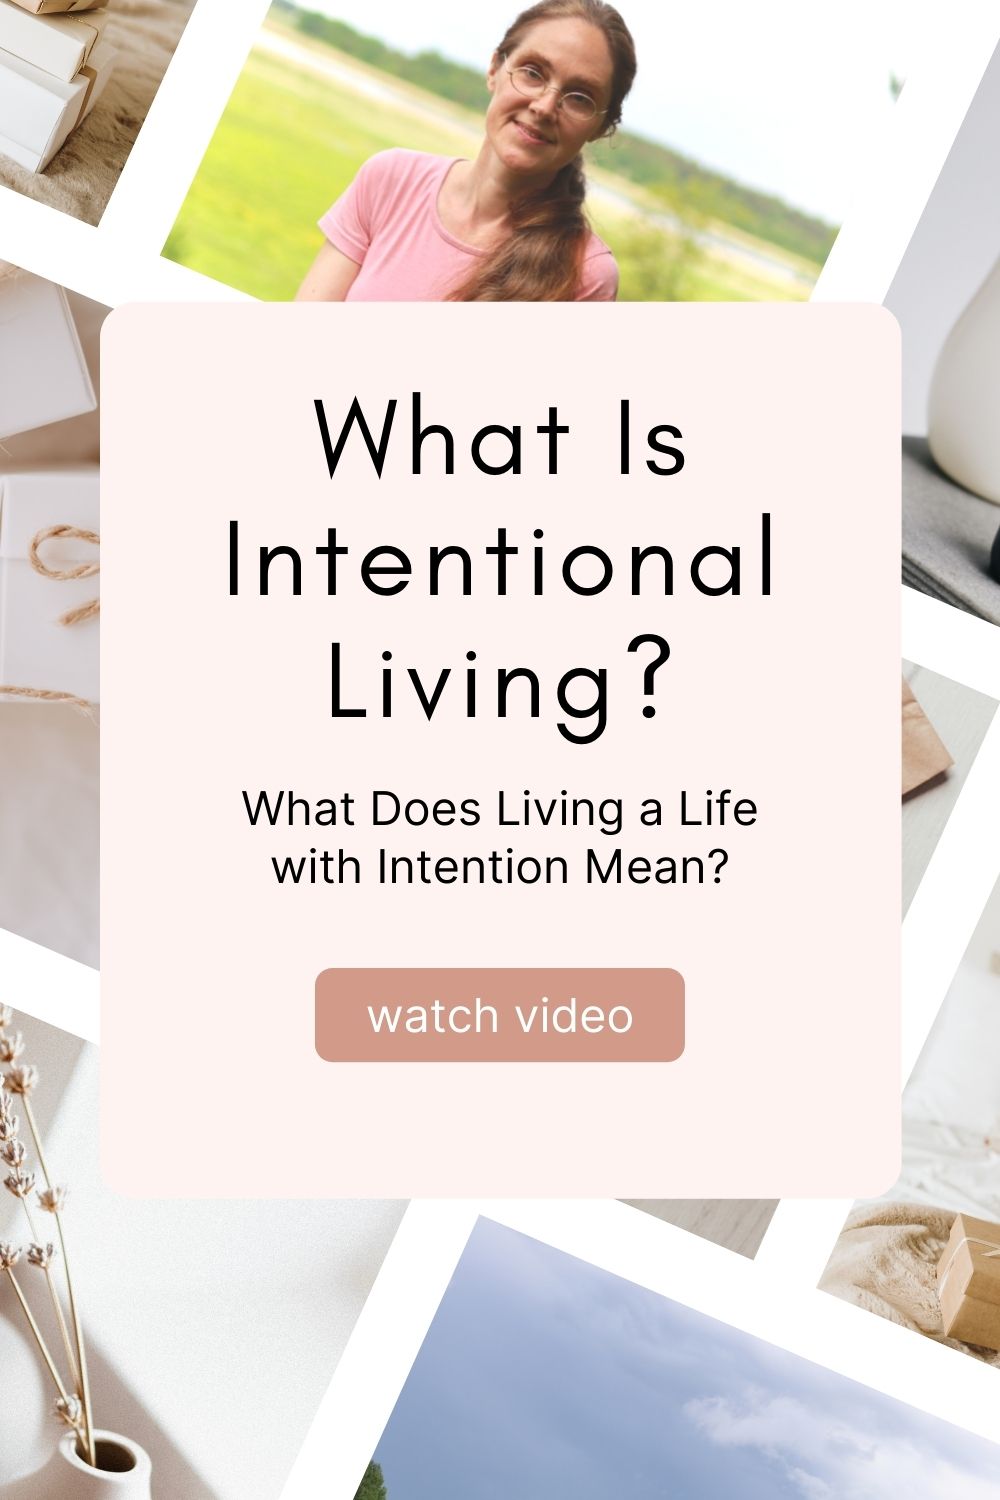 What Is Intentional Living?